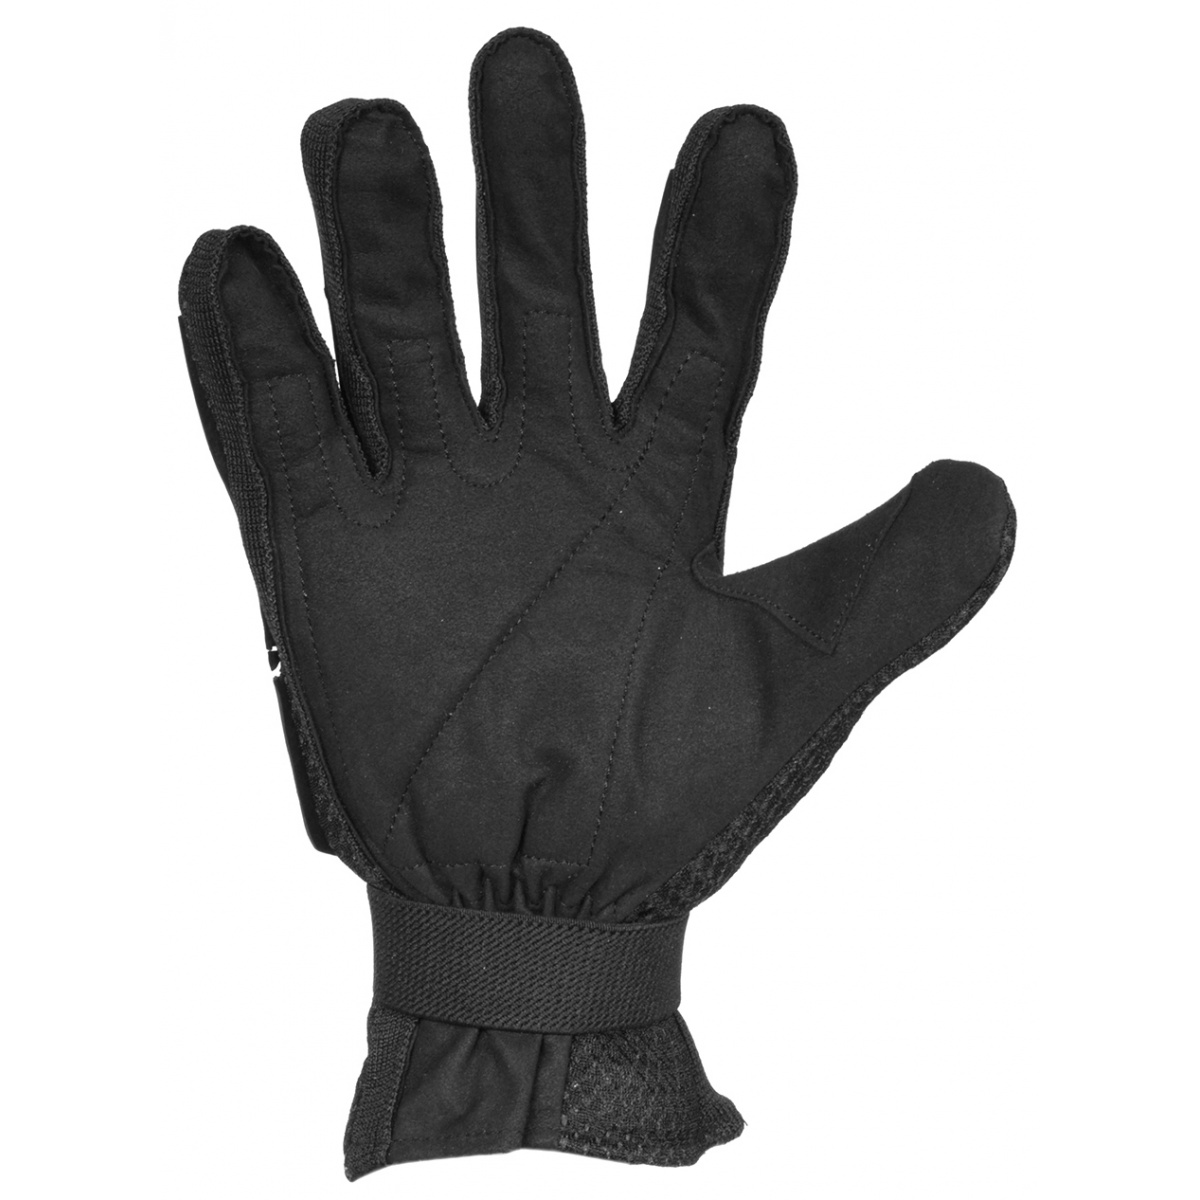 G-Force Nitrex Tactical Gloves w/ Rubberized Protection (MED) - BLACK ...